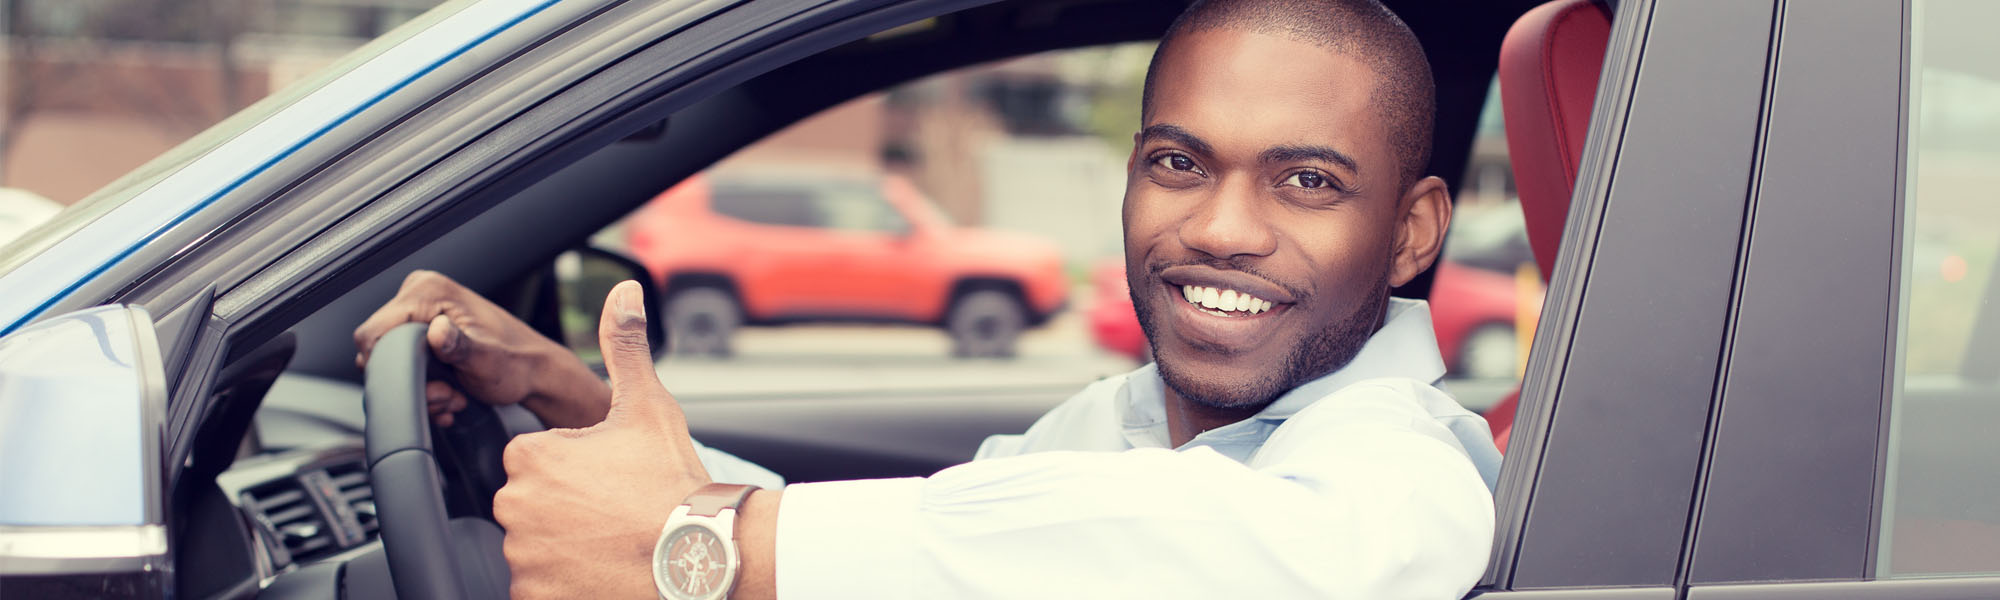 Man Giving Thumbs Up While Driving